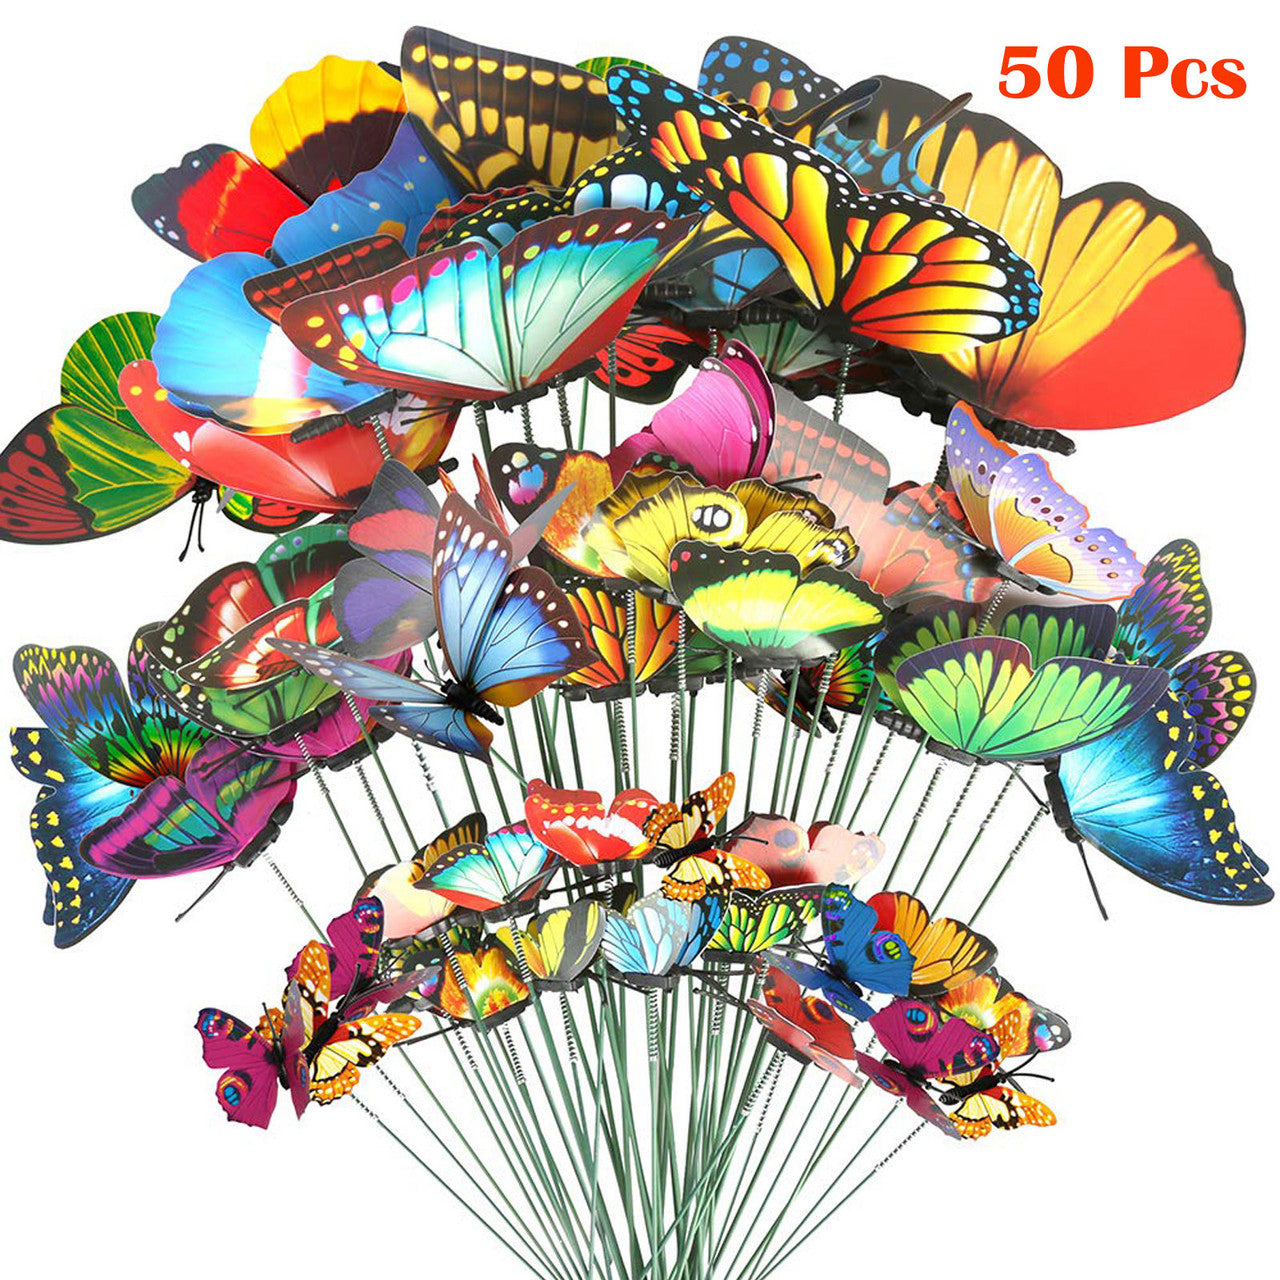 Garden Butterfly Stakes, Waterproof Butterflies Stakes 11.5inch Yard Garden Ornaments & Patio Decor Butterfly Party Supplies Yard Stakes Decorative for Outdoor Christmas Decorations, 50 Pcs